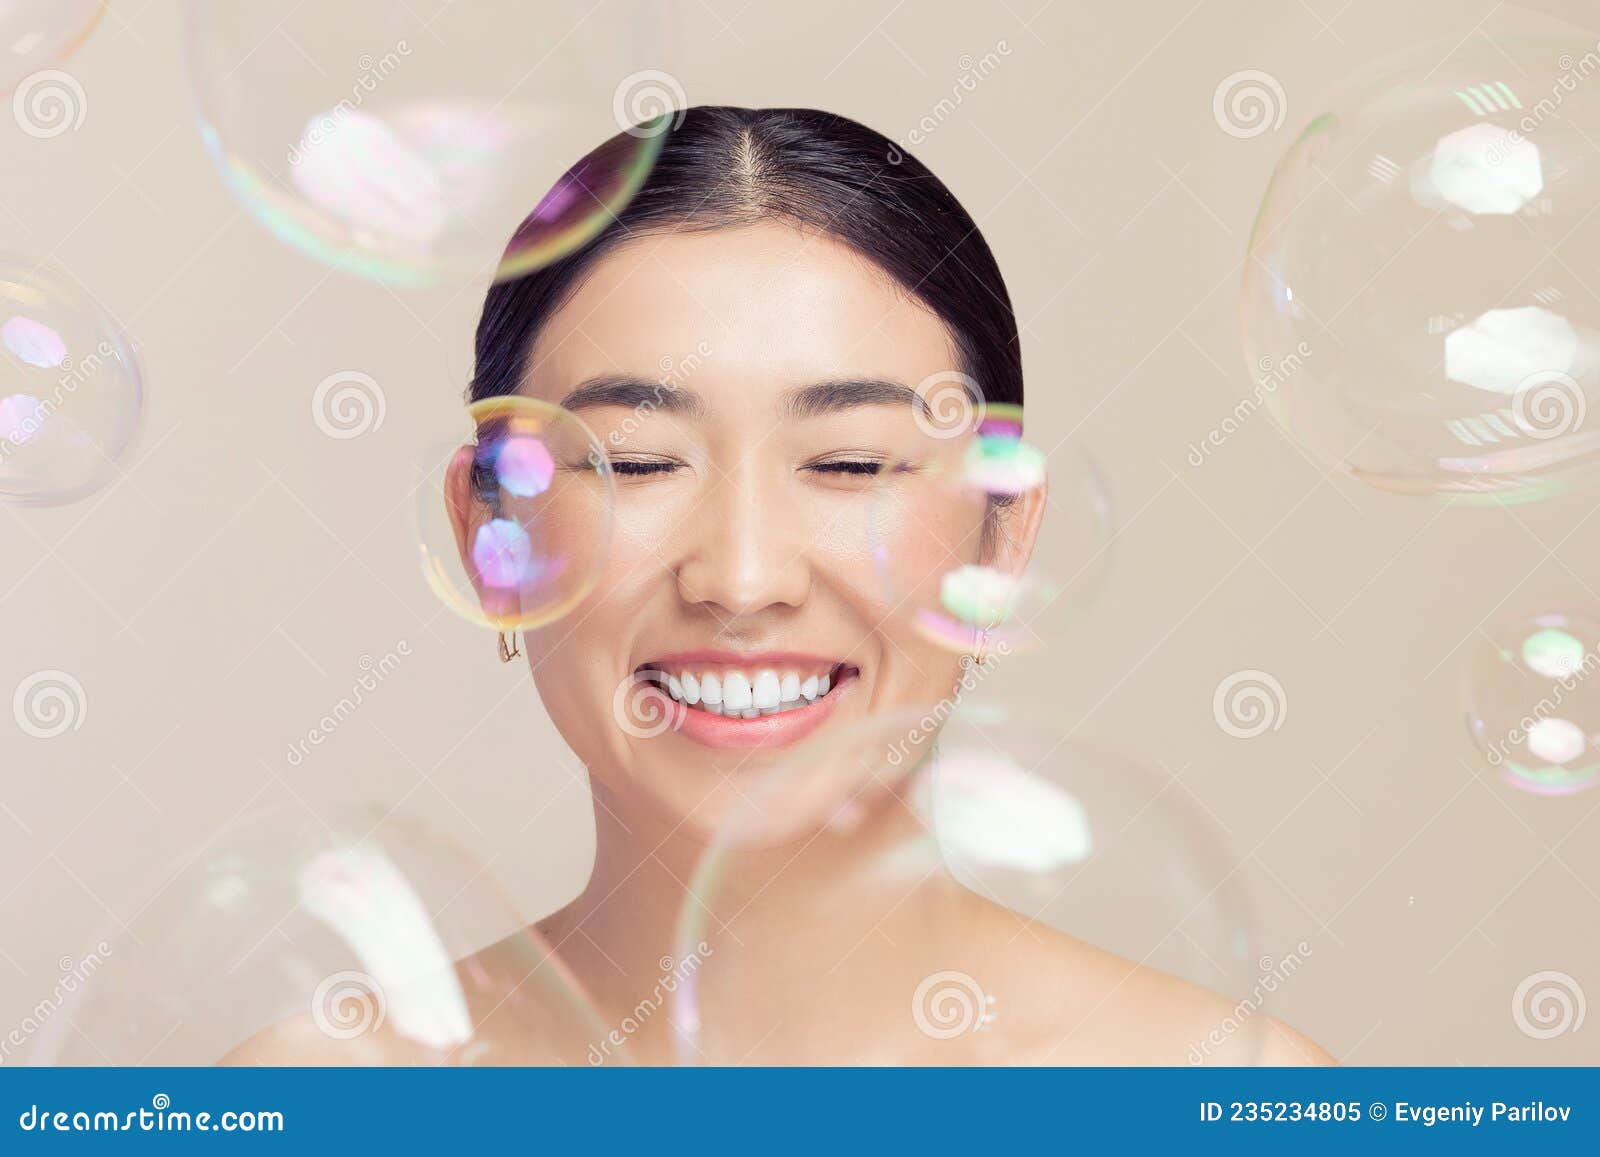 Fashion Asian Happy Young Woman on Background Soap Bubbles, Fake Eyelashes  and Makeup Stock Image - Image of happiness, color: 235234805